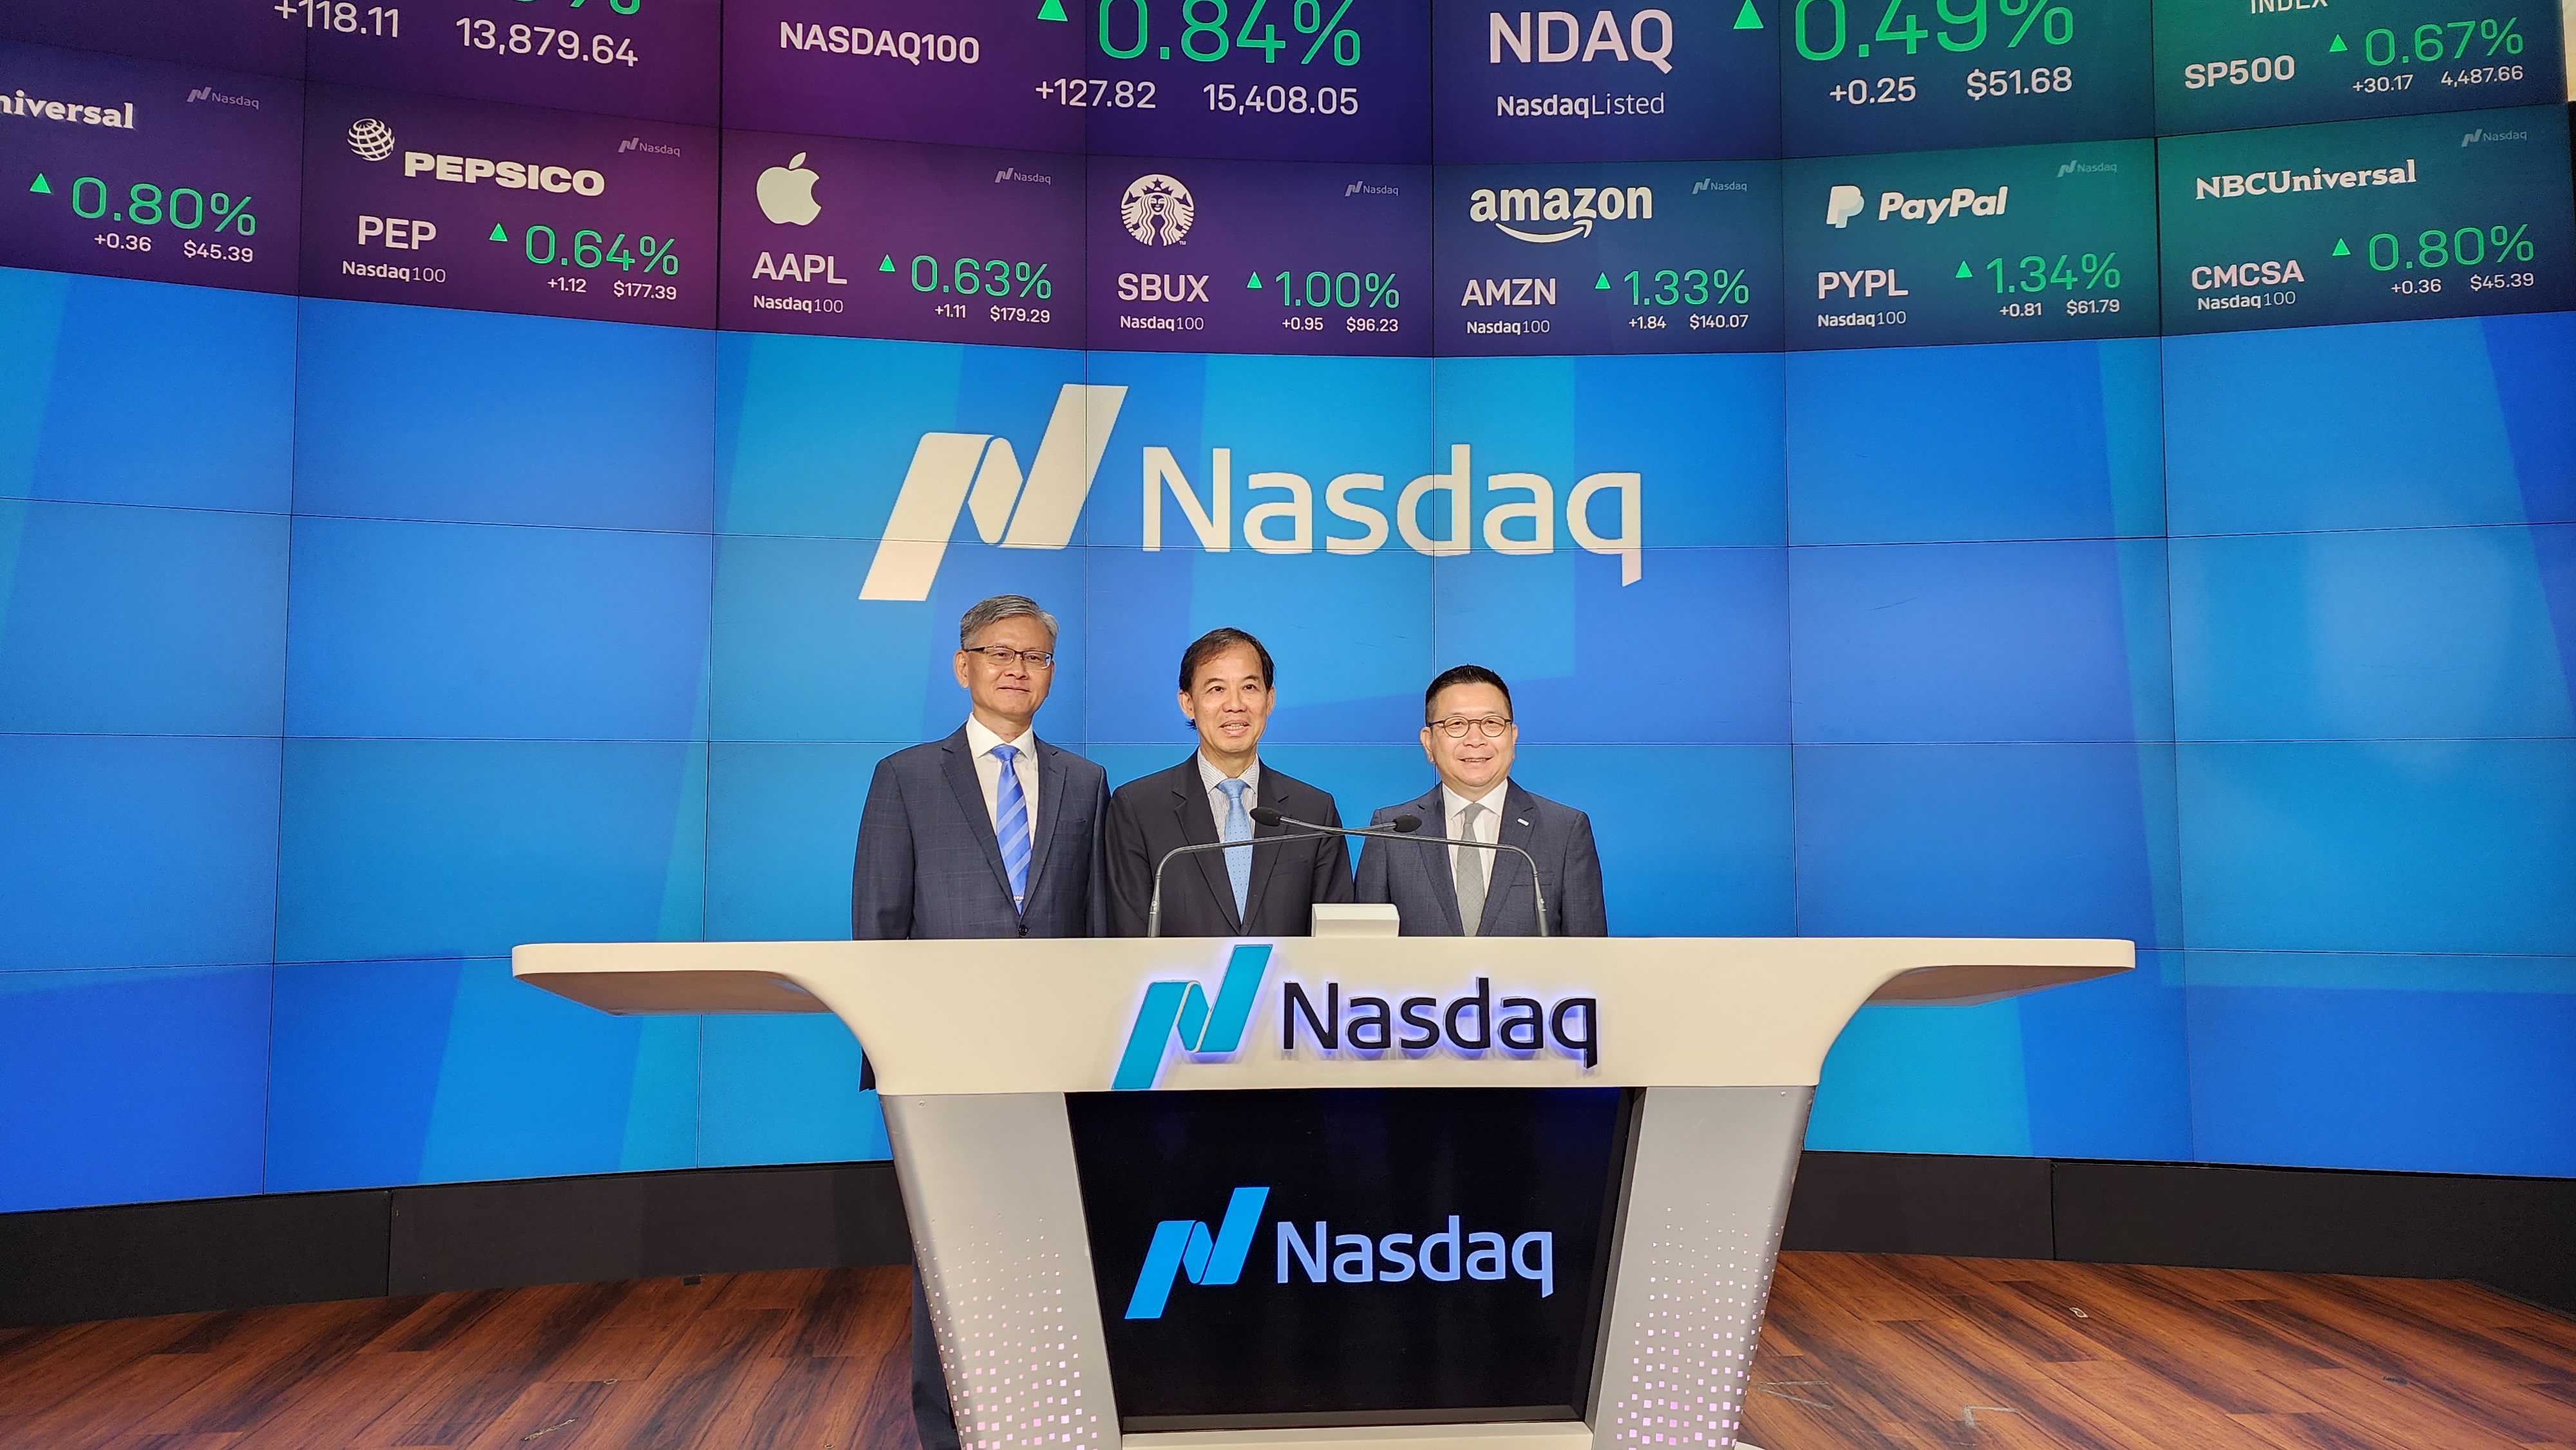 Photo (from left to right): James K.J. Lee, Director-General, Taipei Economic and Cultural Office in New York, Chen-Shan Chang, Director-General of the Securities and Futures Bureau of the Financial Supervisory Commission, and Sherman Lin, Chairman and CEO of the TWSE visited Nasdaq and watched the opening bell ringing ceremony.